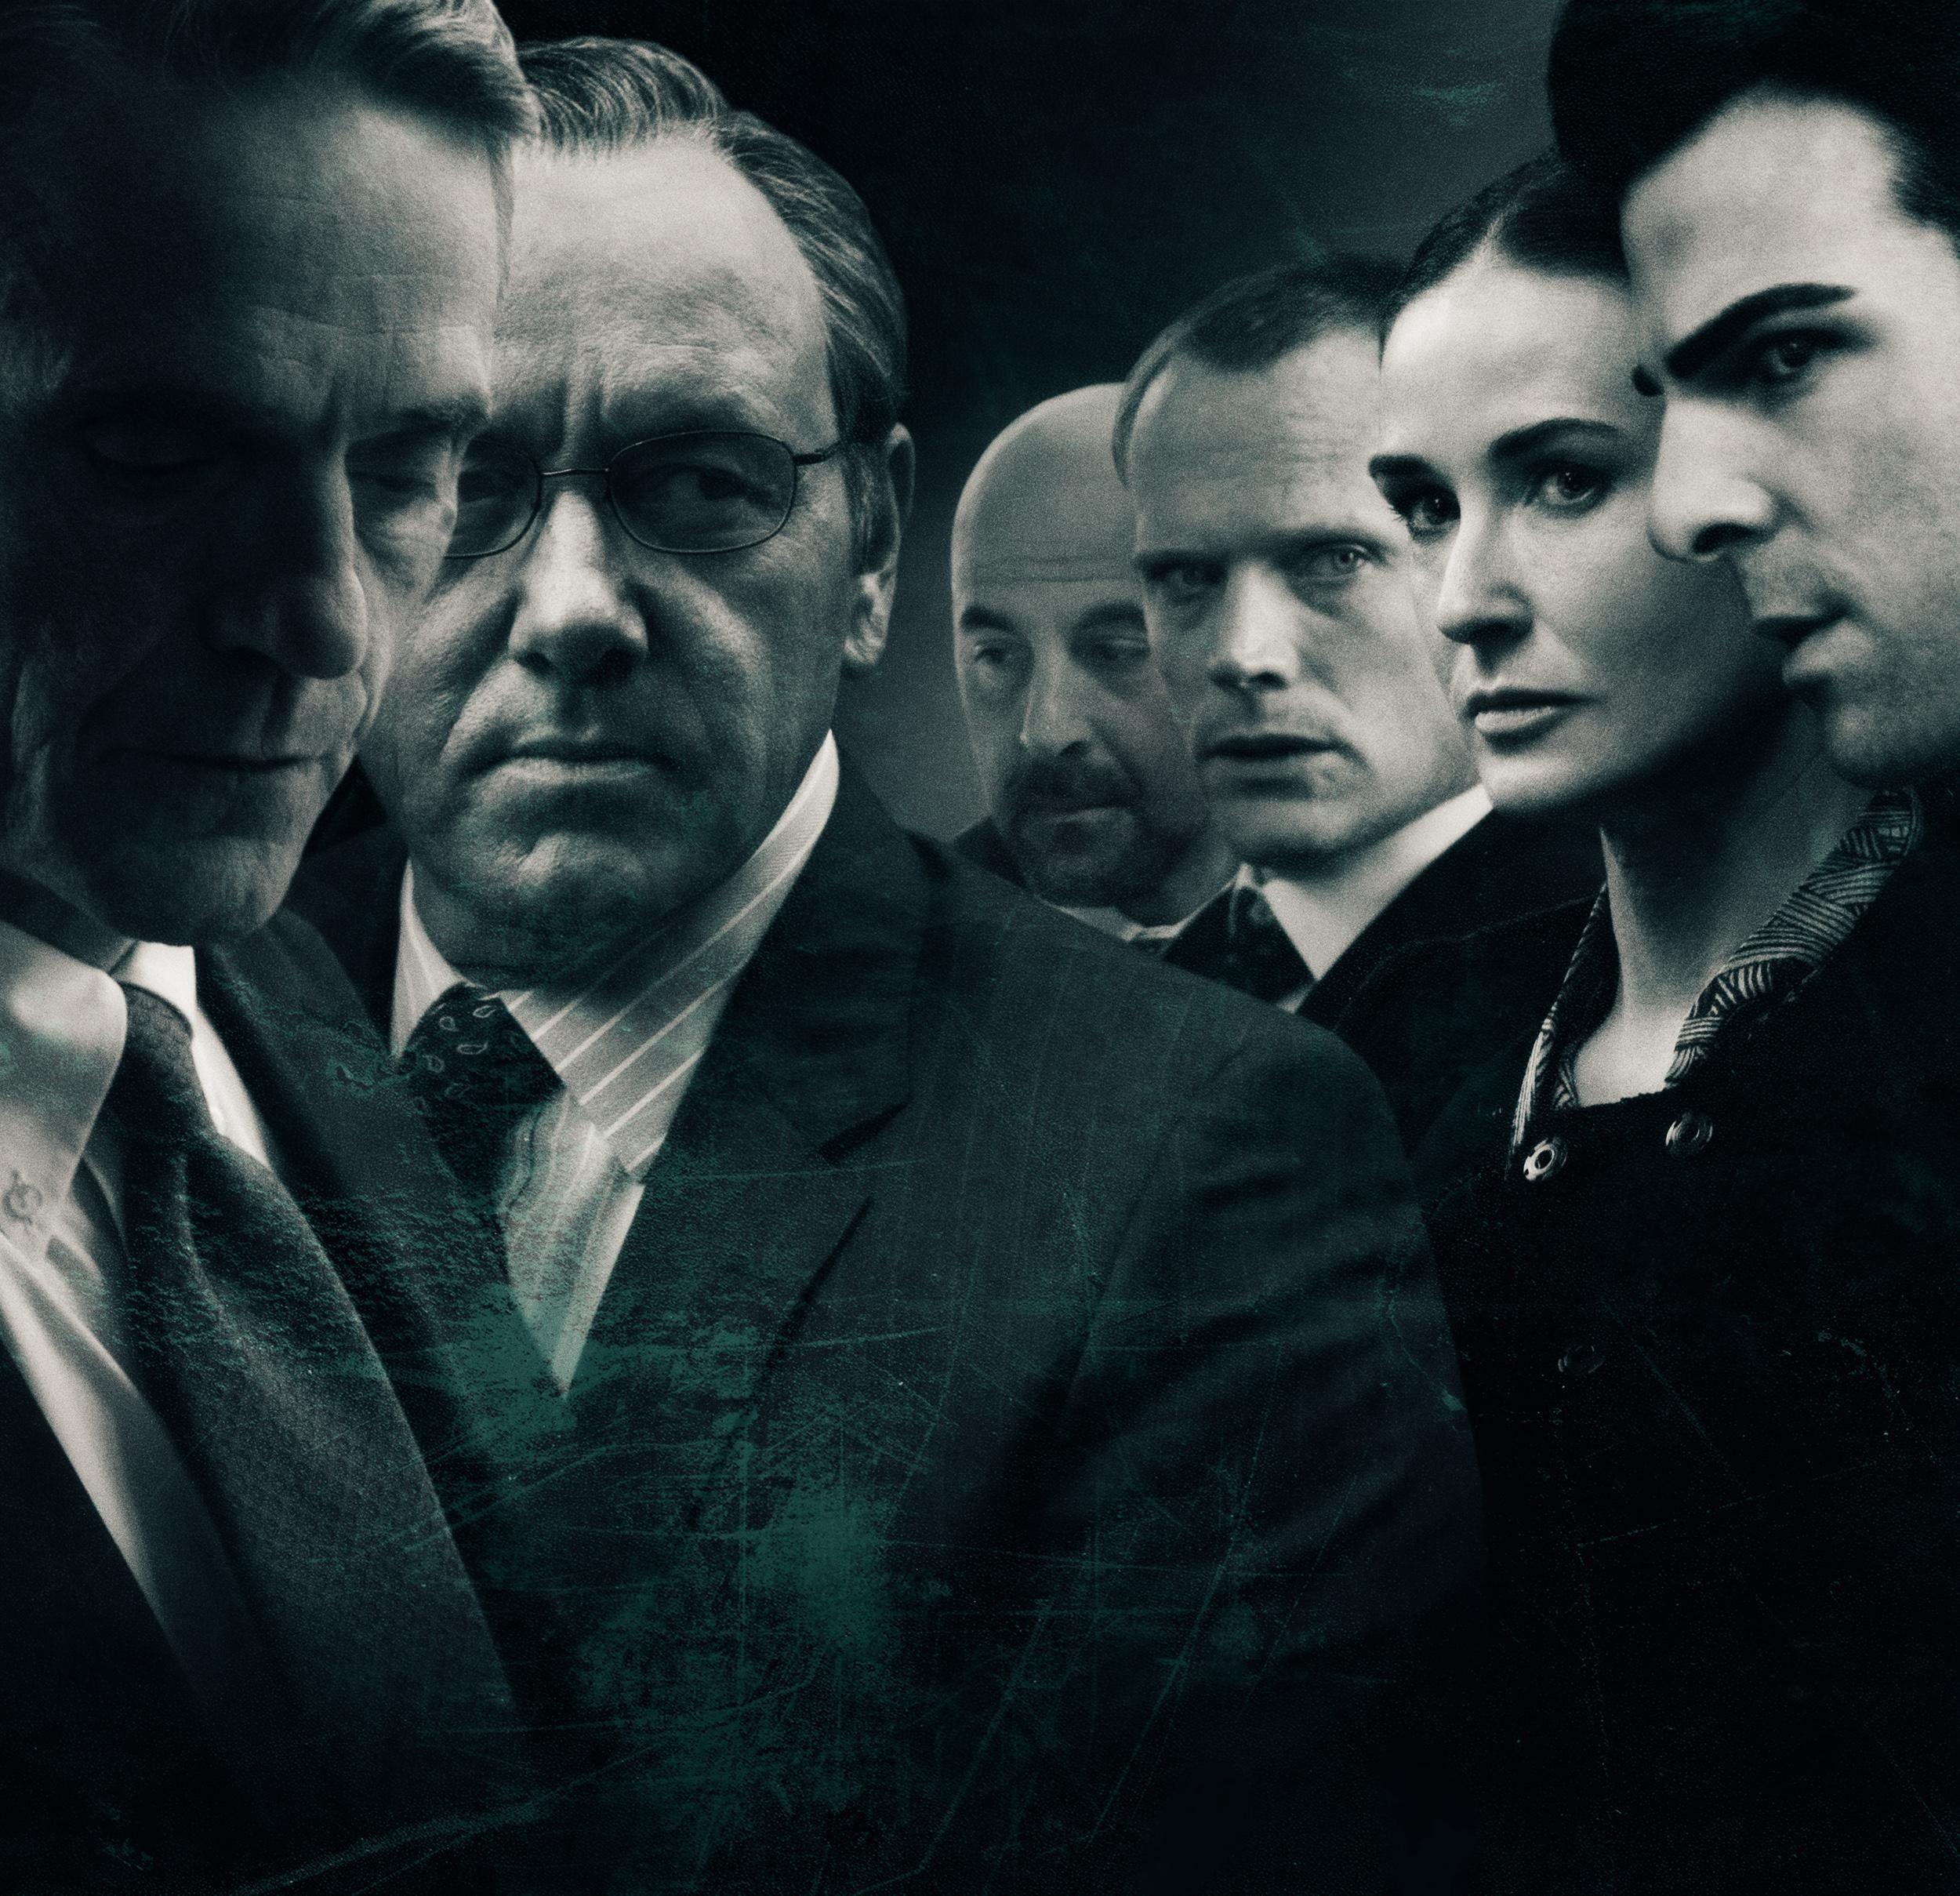 Irons kevin spacey paul bettany stanley tucci wallpaper